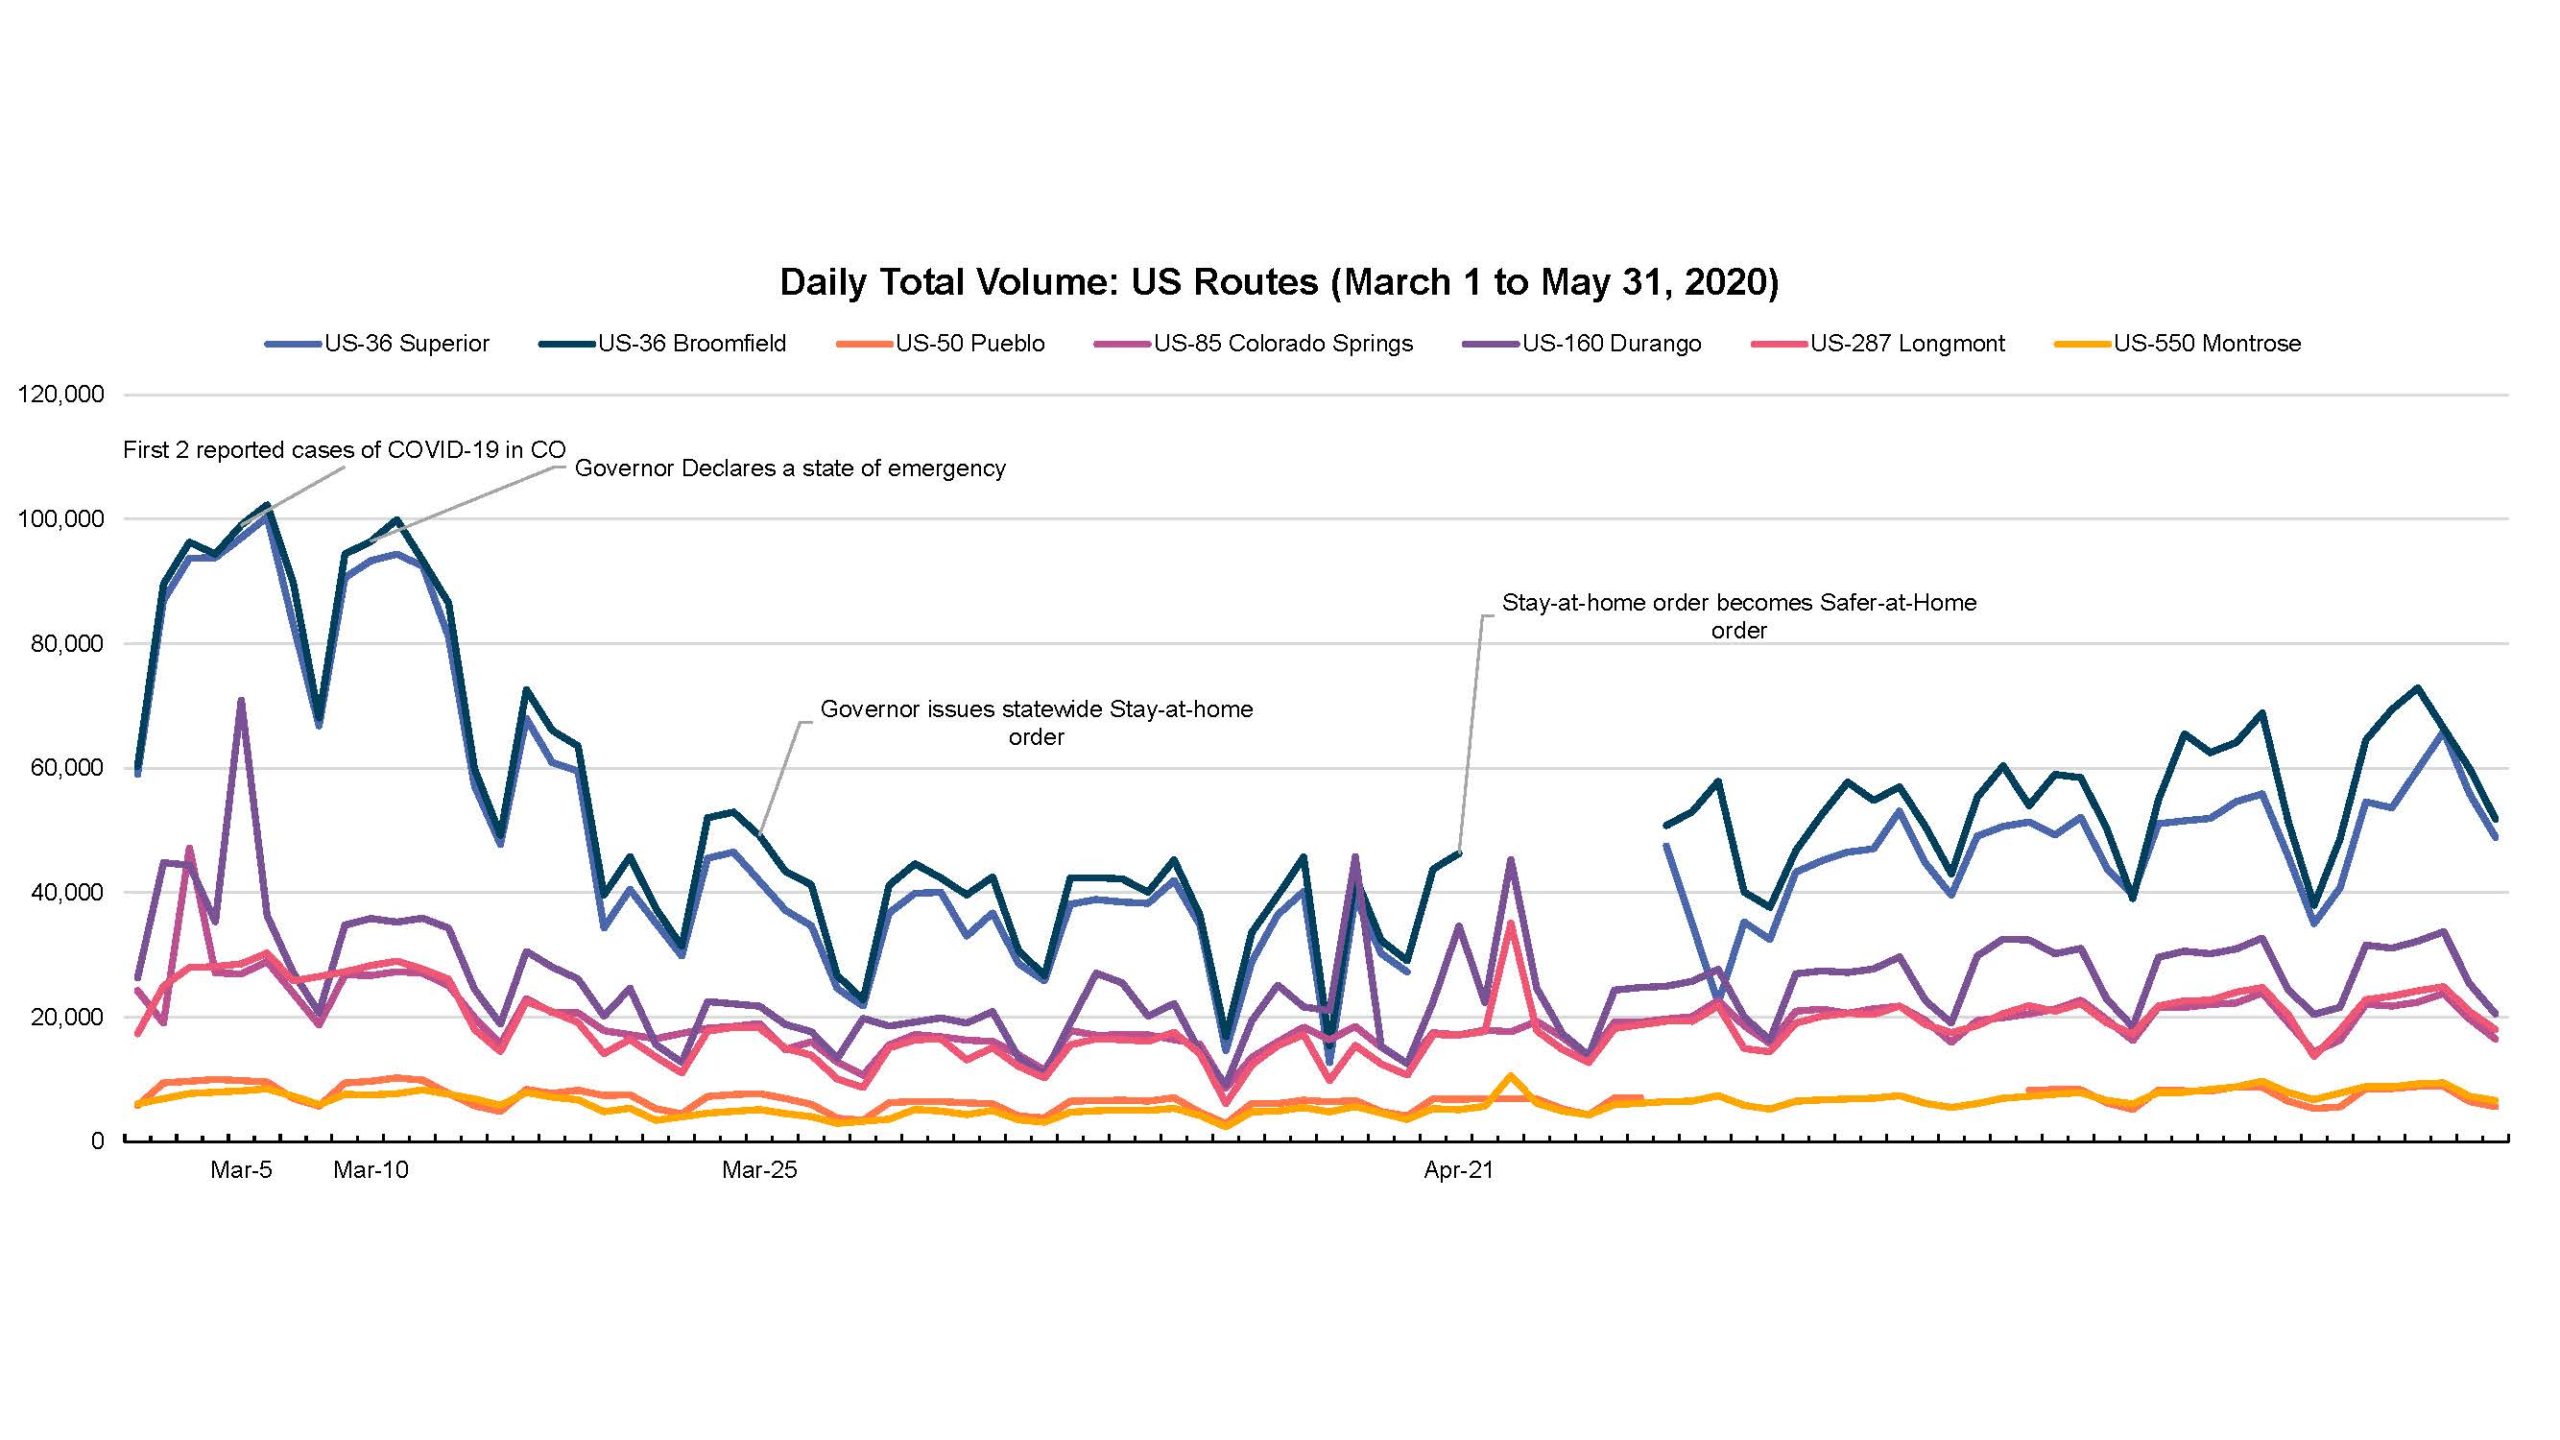 Daily Total Traffic Volumes